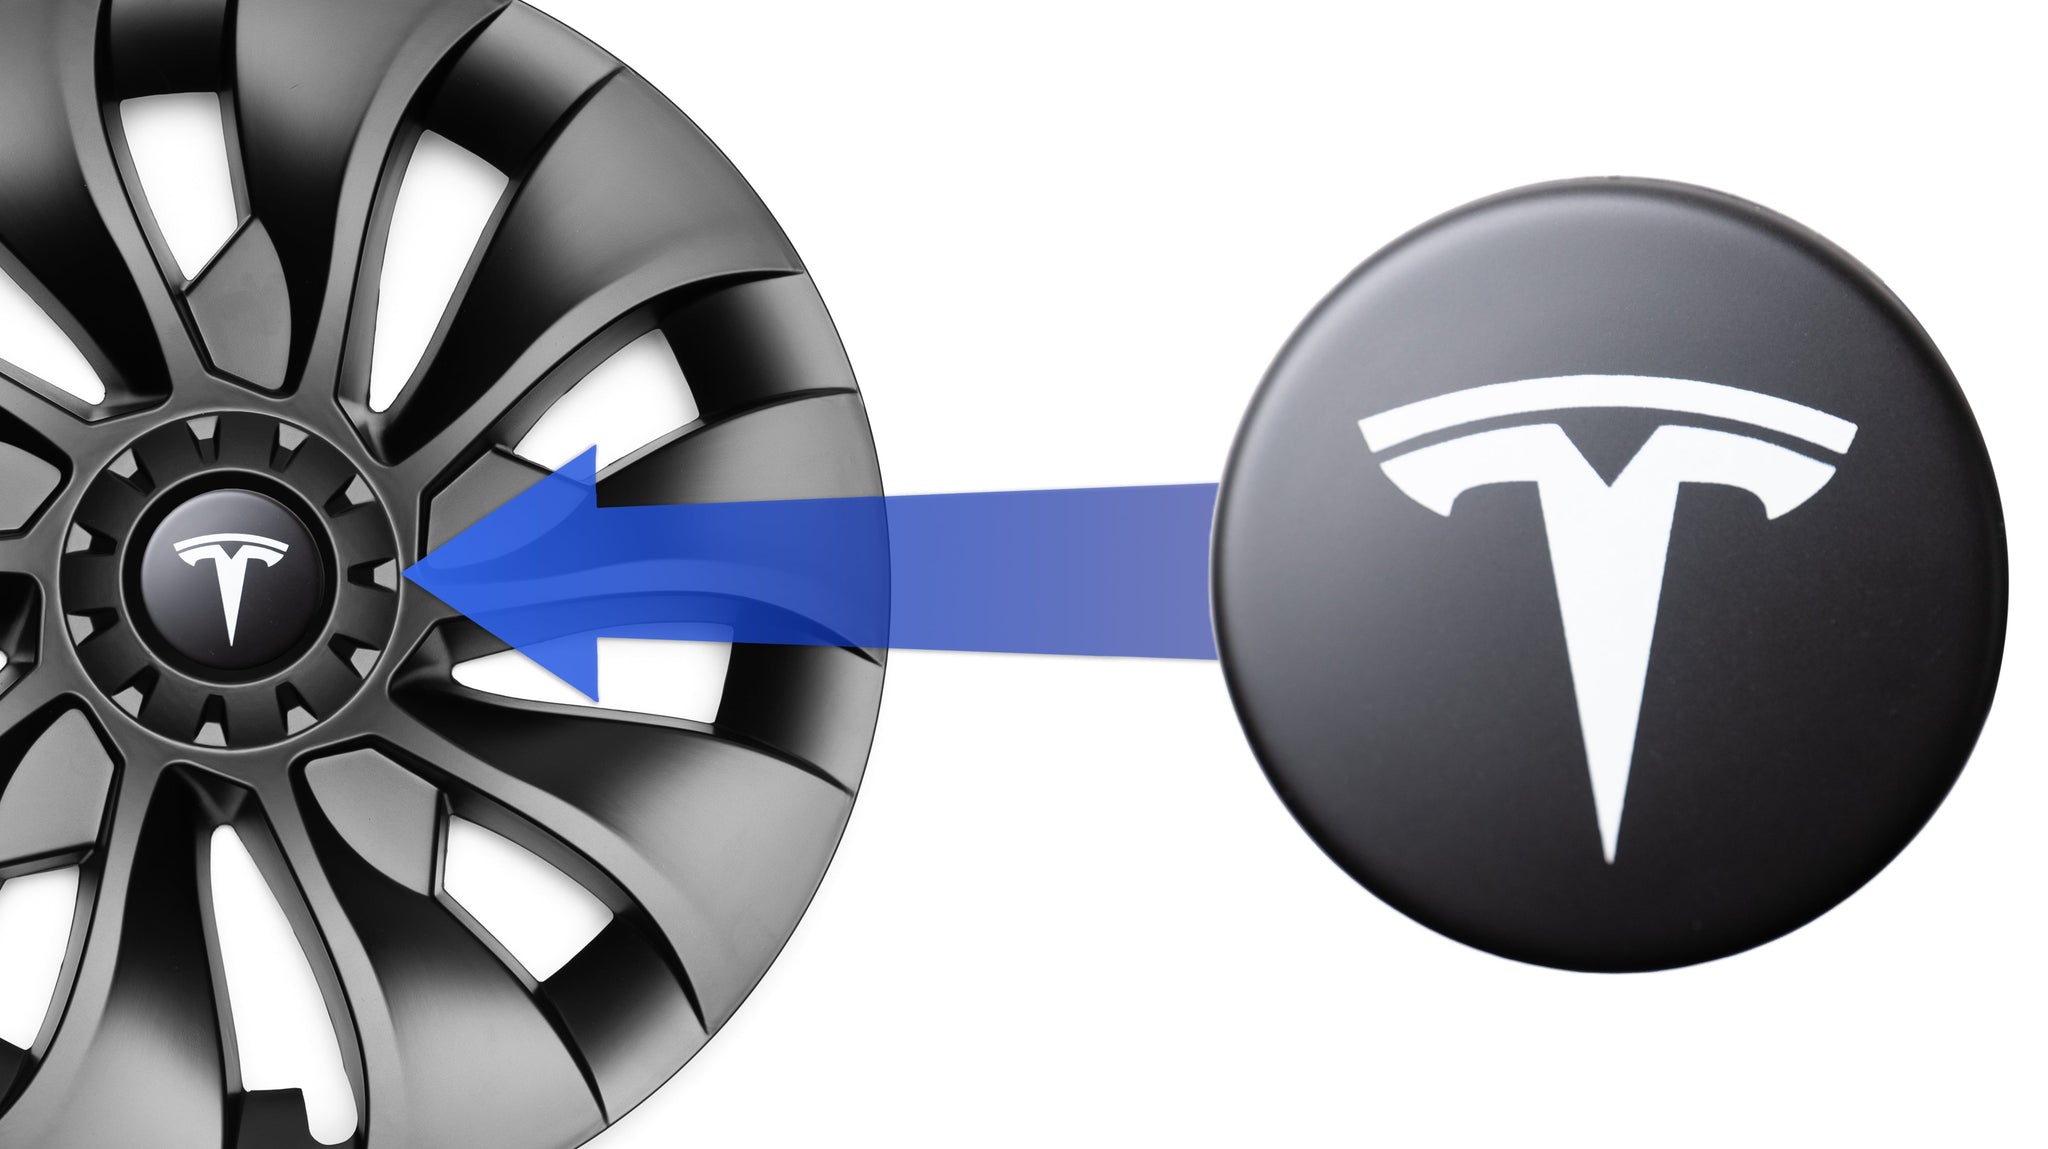 Logos (4x) for hubcaps of the Tesla Model 3/Y